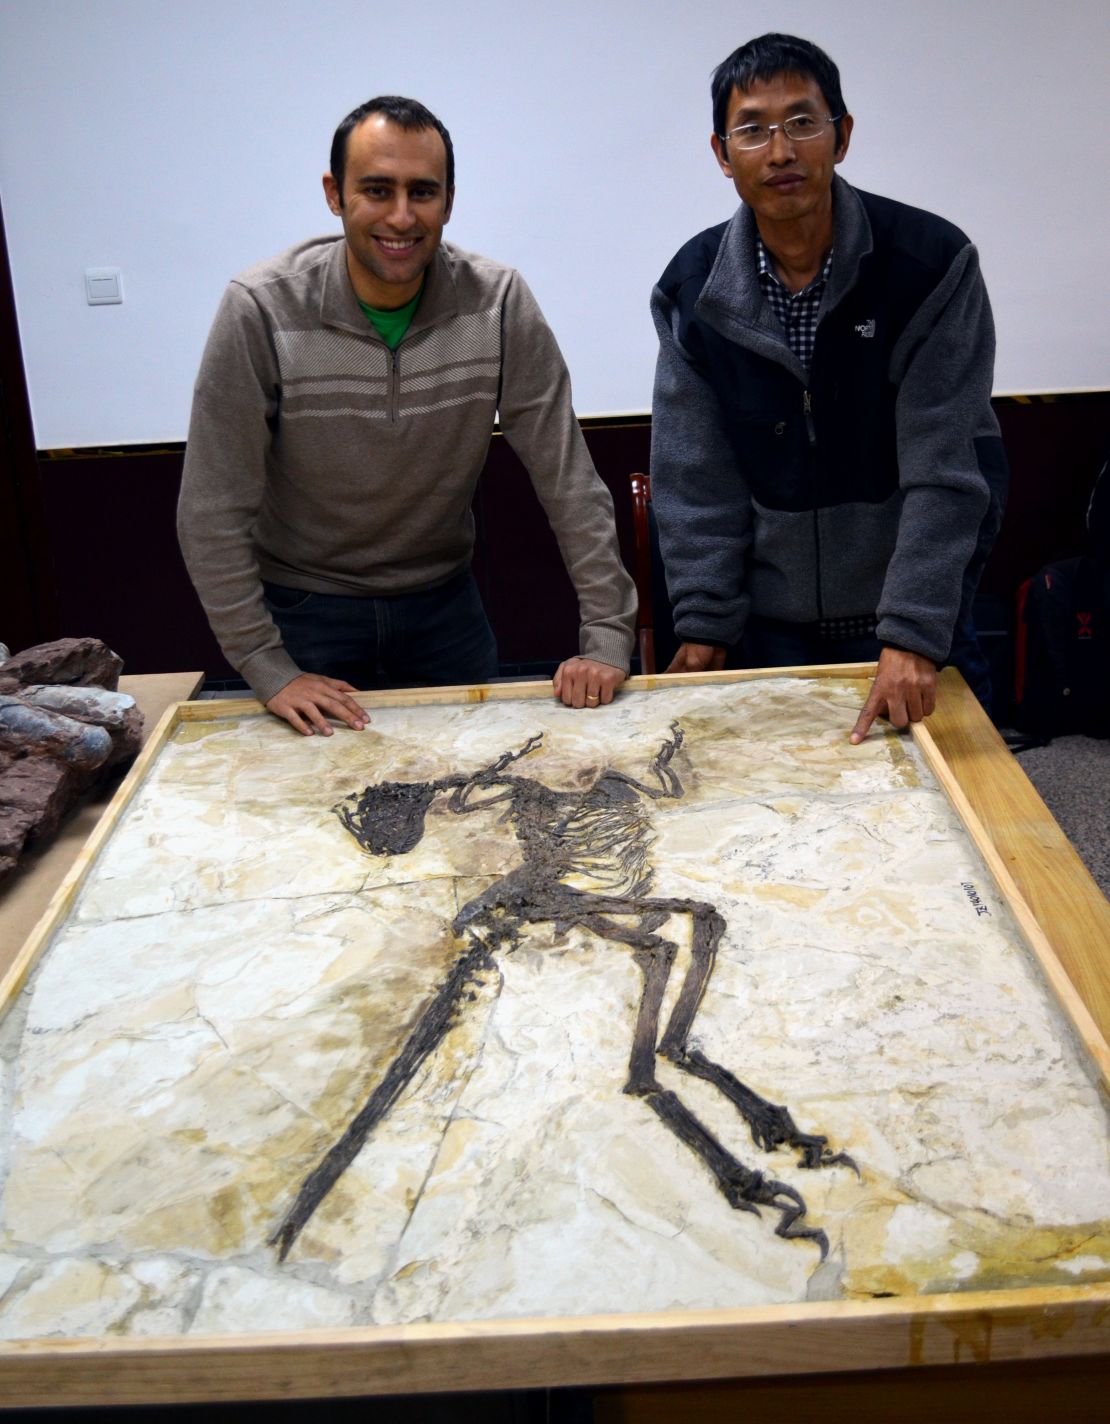 Steve Brusatte, left, and Lu Junchang posts in front of the Zhenyuanlong skeleton